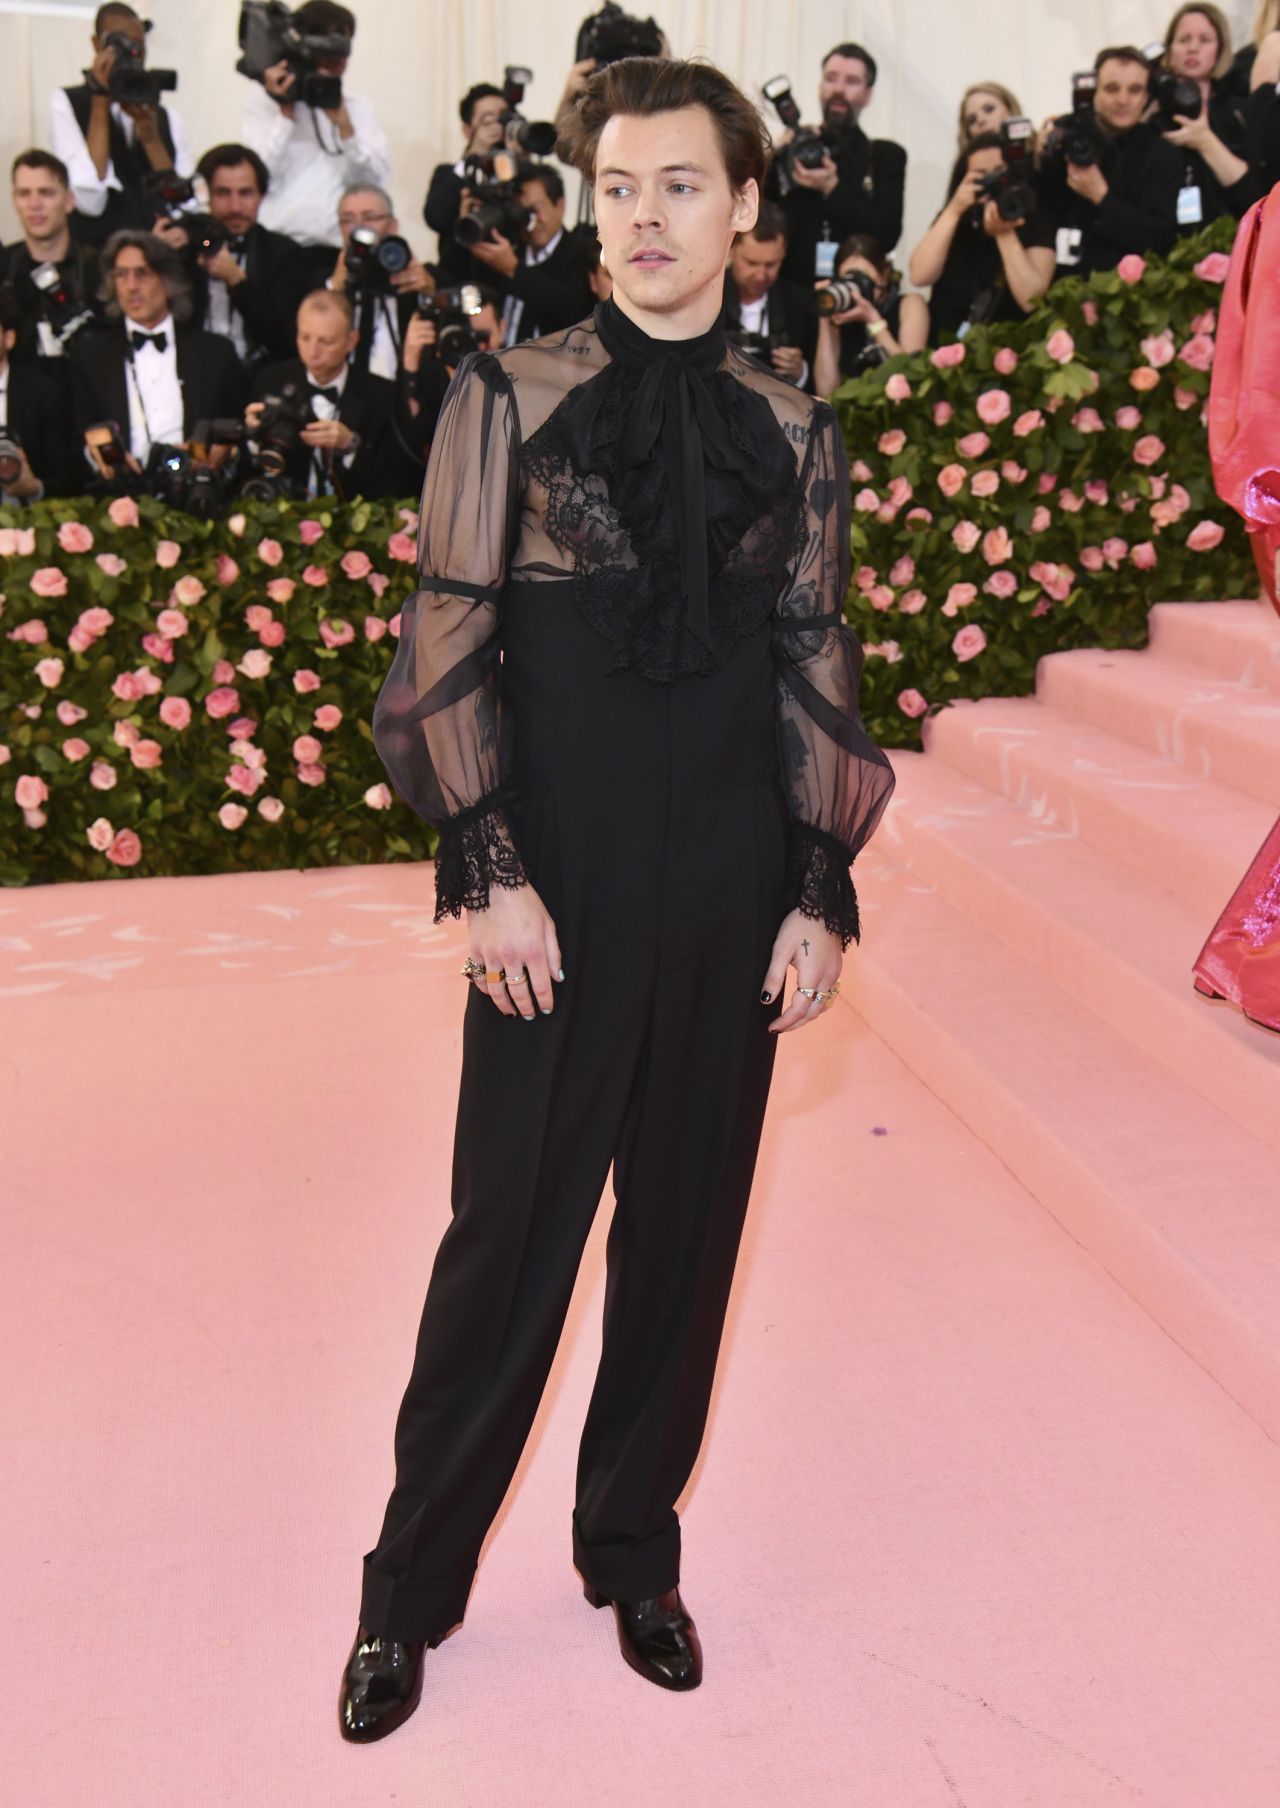 Harry Styles attends the Met Gala wearing Gucci.